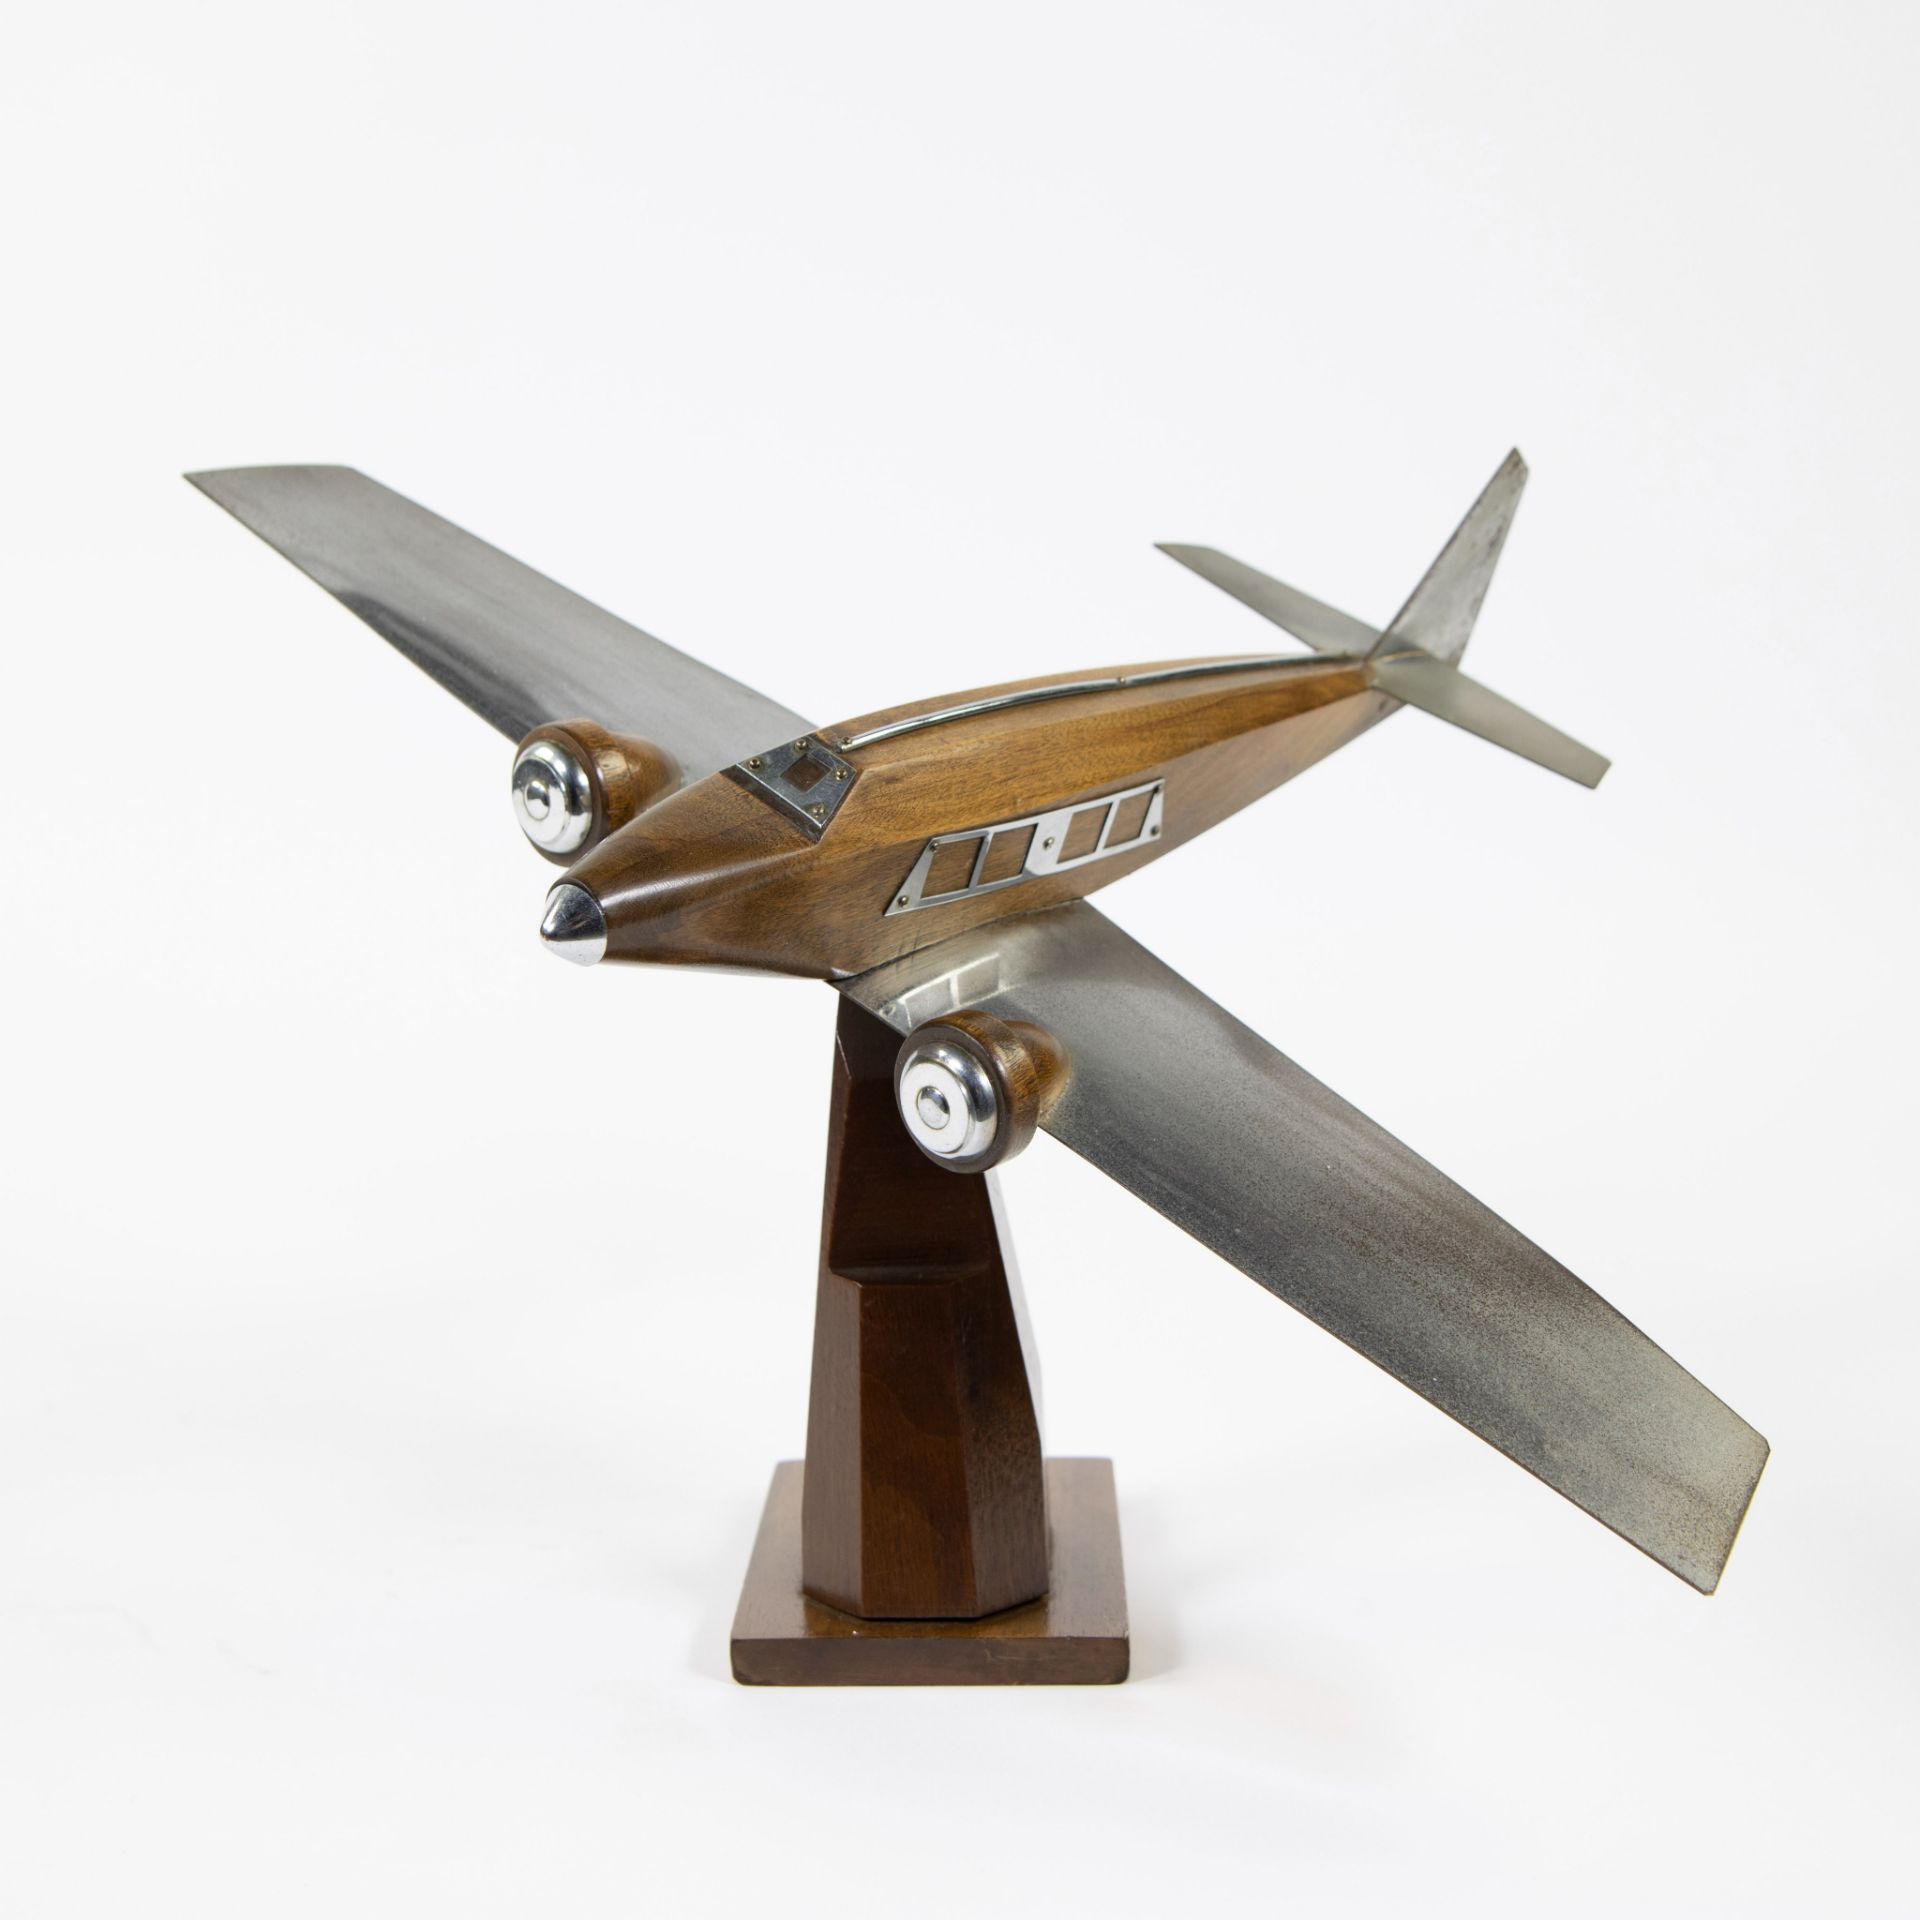 Art Deco French model of an airplane from the 1930s